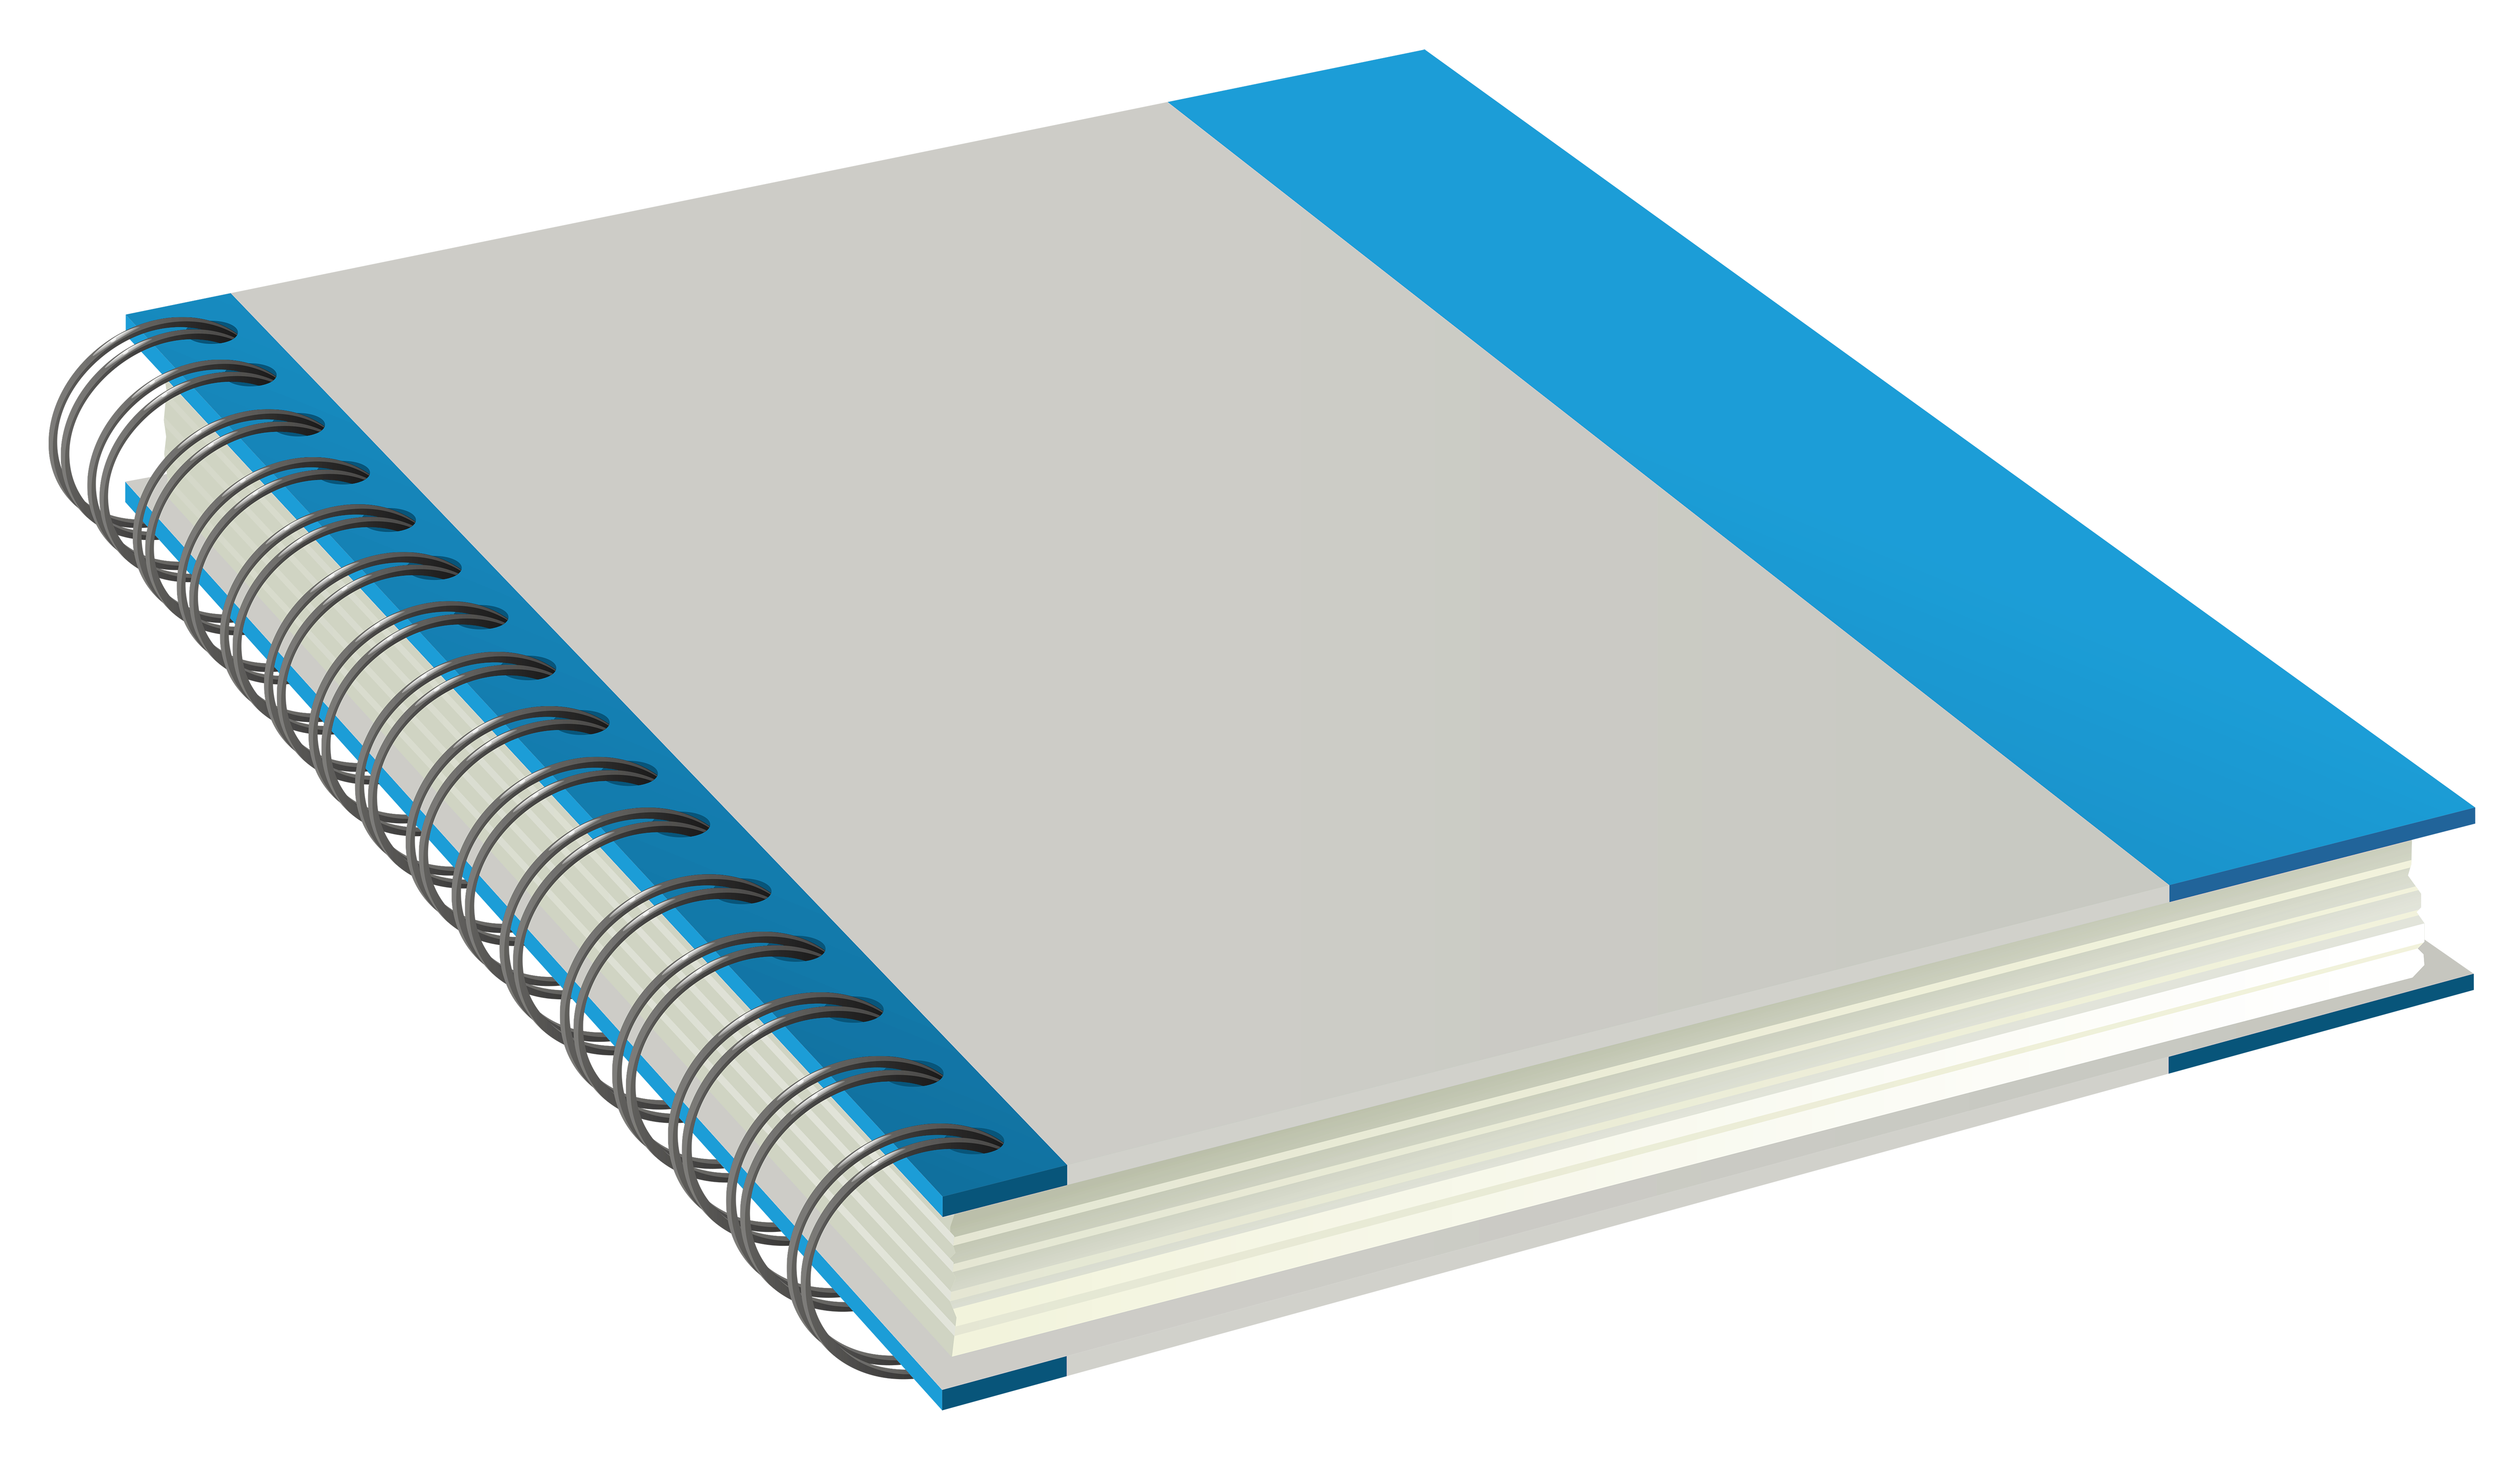 Cuaderno PNG HD Quality